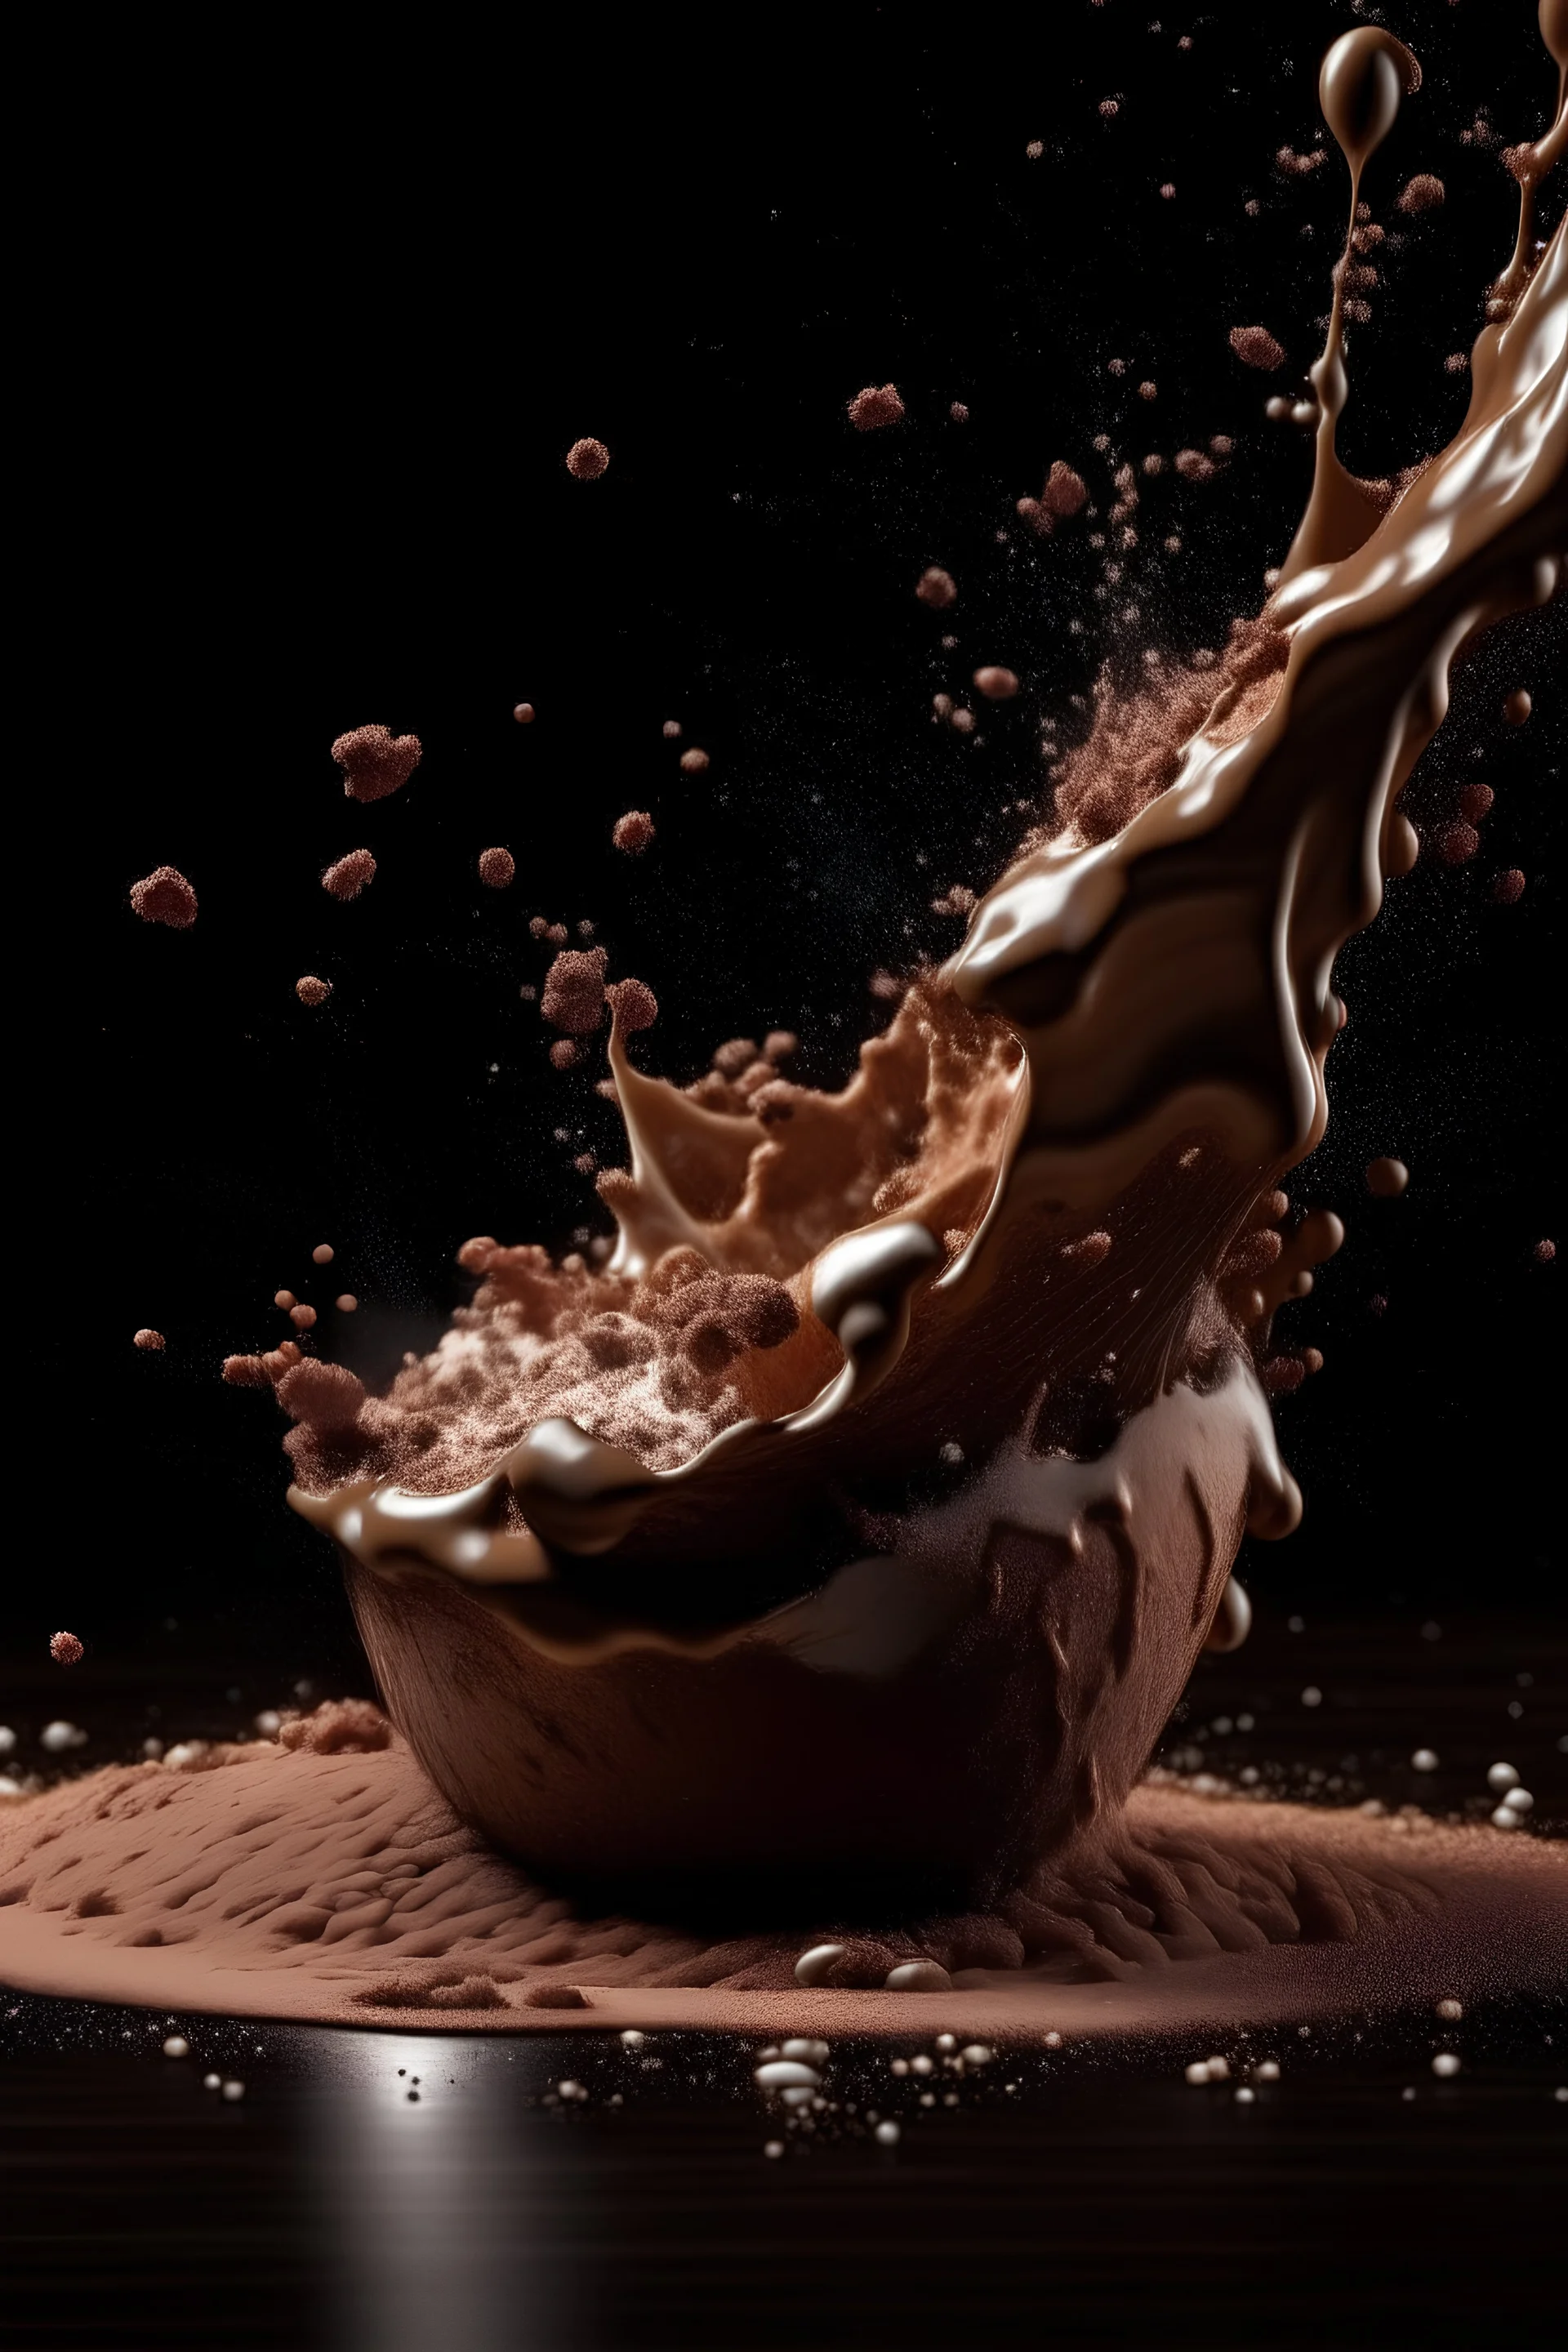 Cocoa powder and dry milk explode